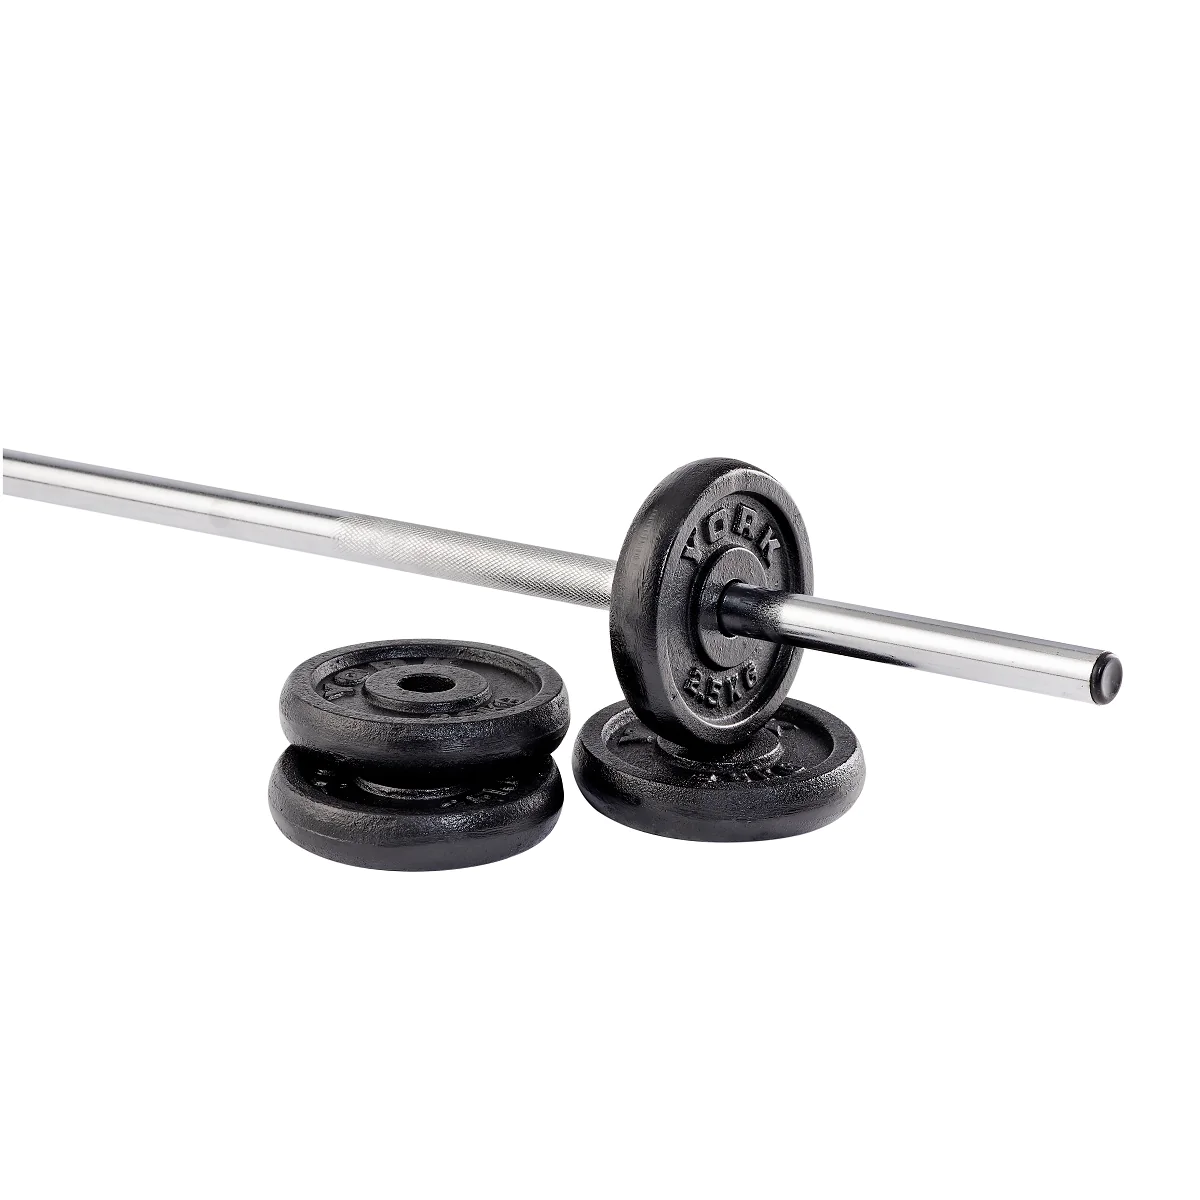 York Fitness 8 x 1.25kg Weight Plates - Review